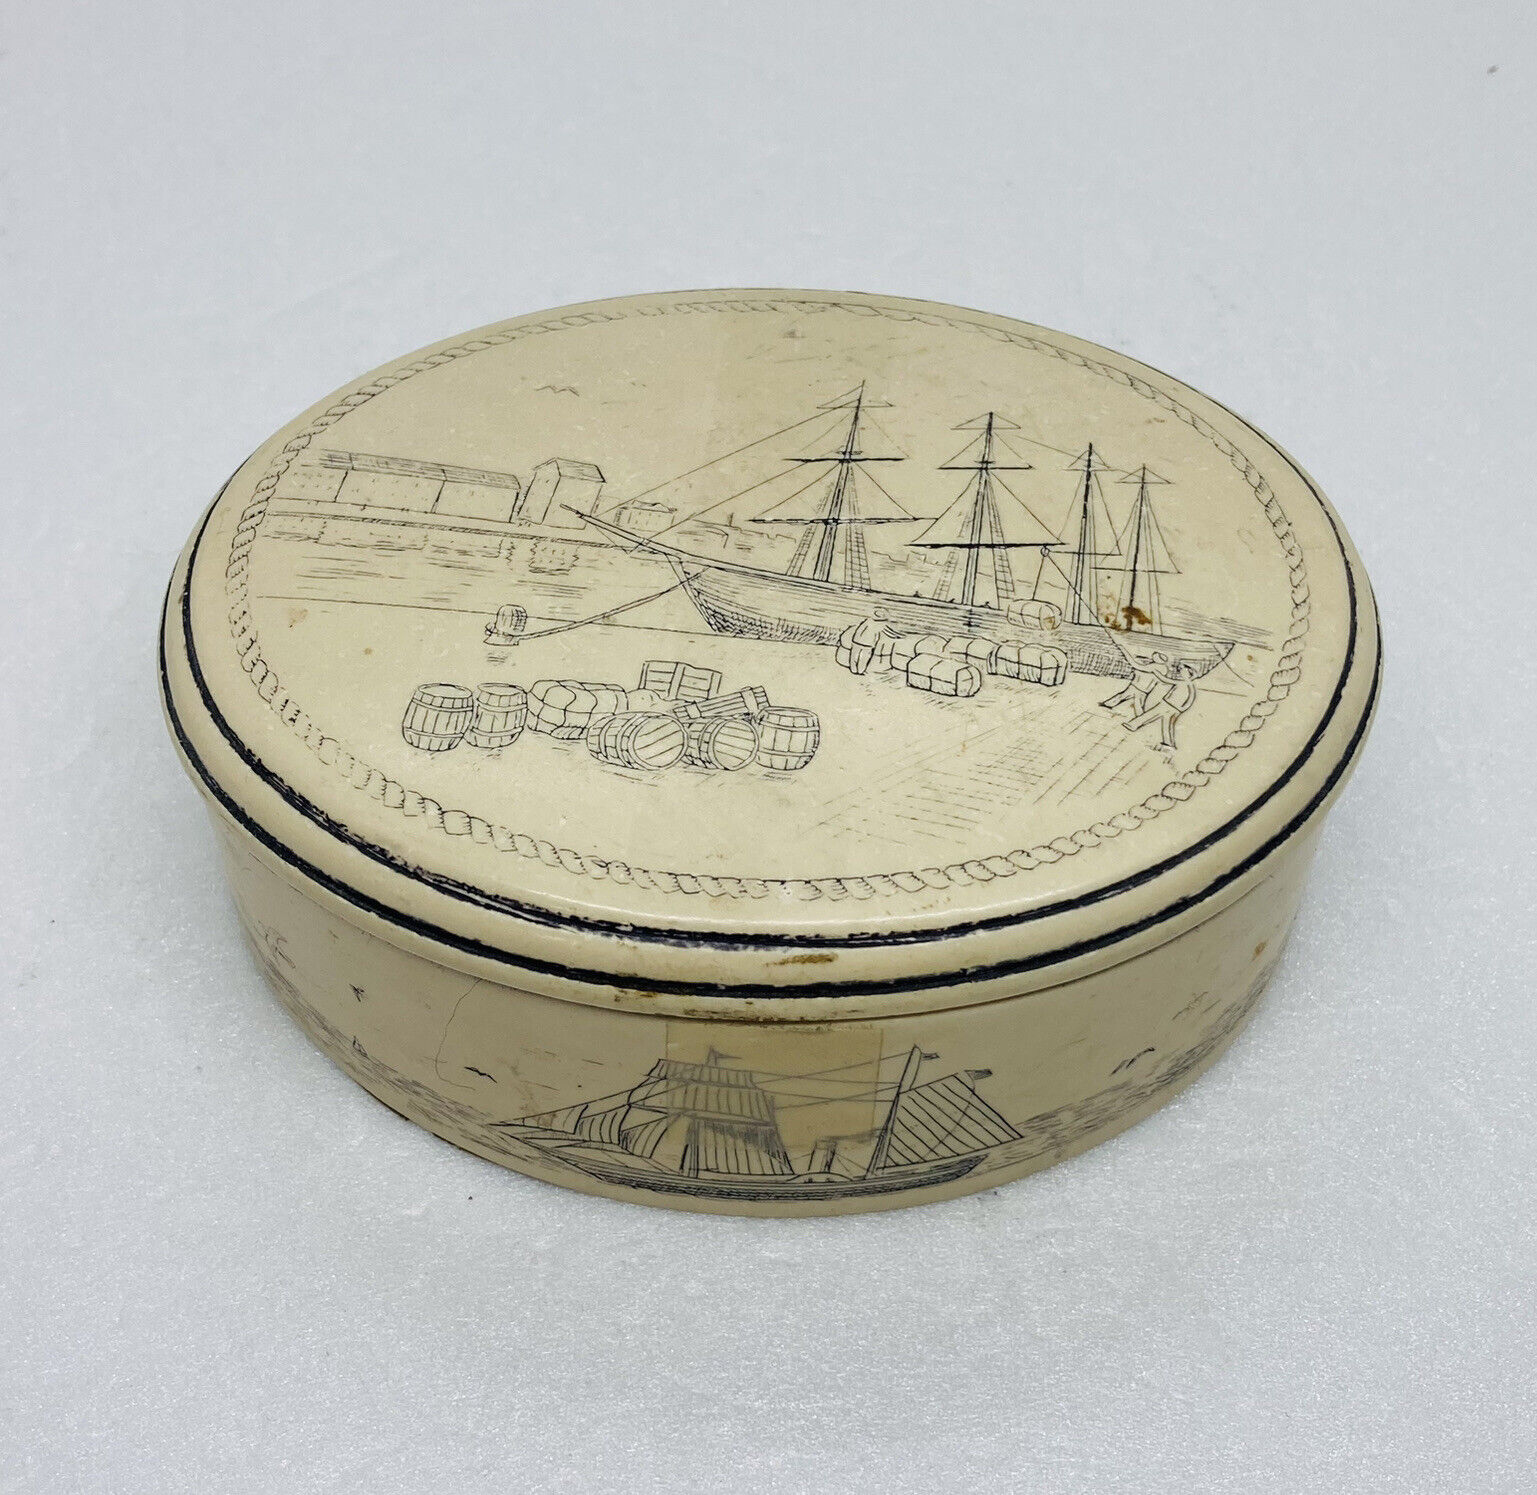 Rare 1920s Hand Etched Stone Trinket Box Cargo Shipping Sailboats Compass Art 10